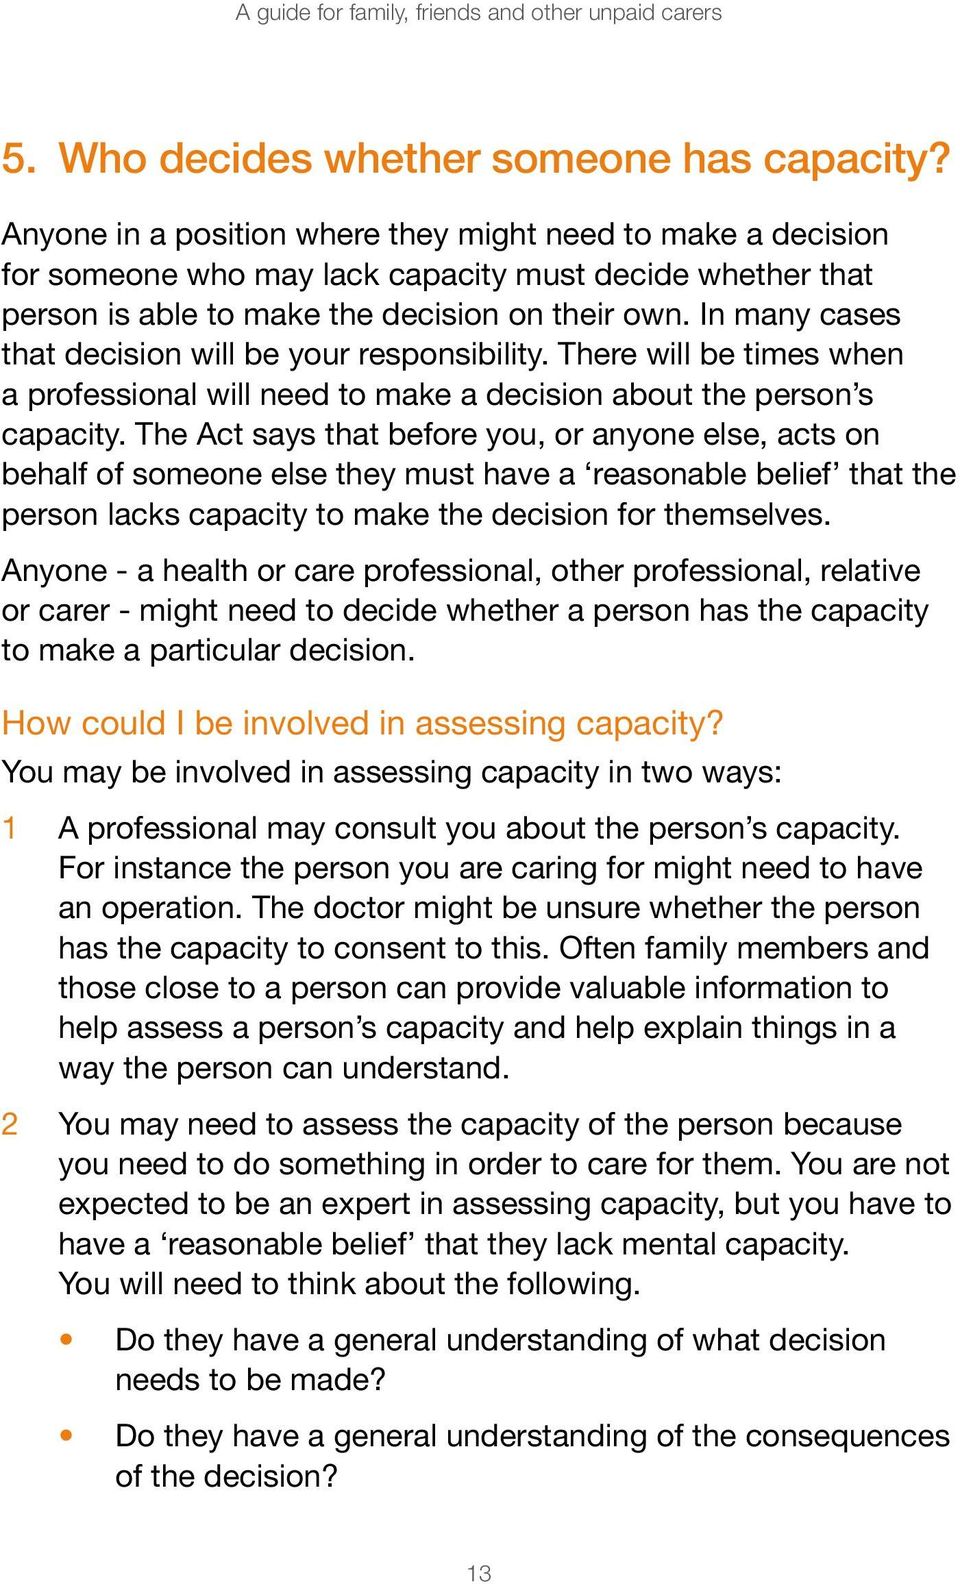 In many cases that decision will be your responsibility. There will be times when a professional will need to make a decision about the person s capacity.